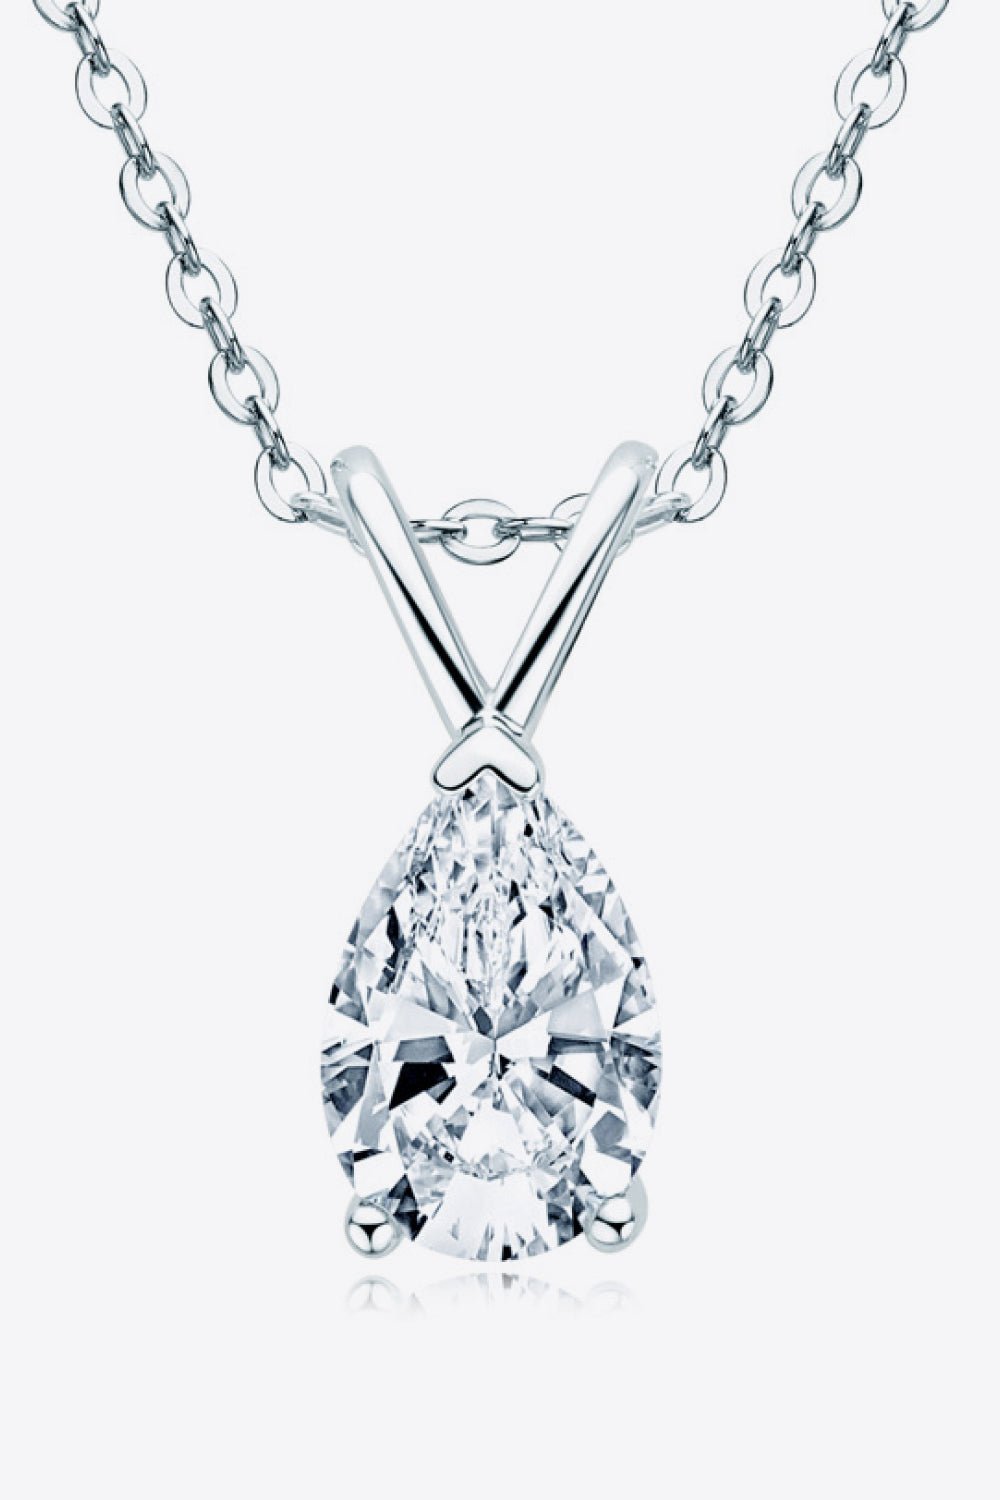 1.5 Carat Moissanite Pendant 925 Sterling Silver Necklace - Uylee's Boutique